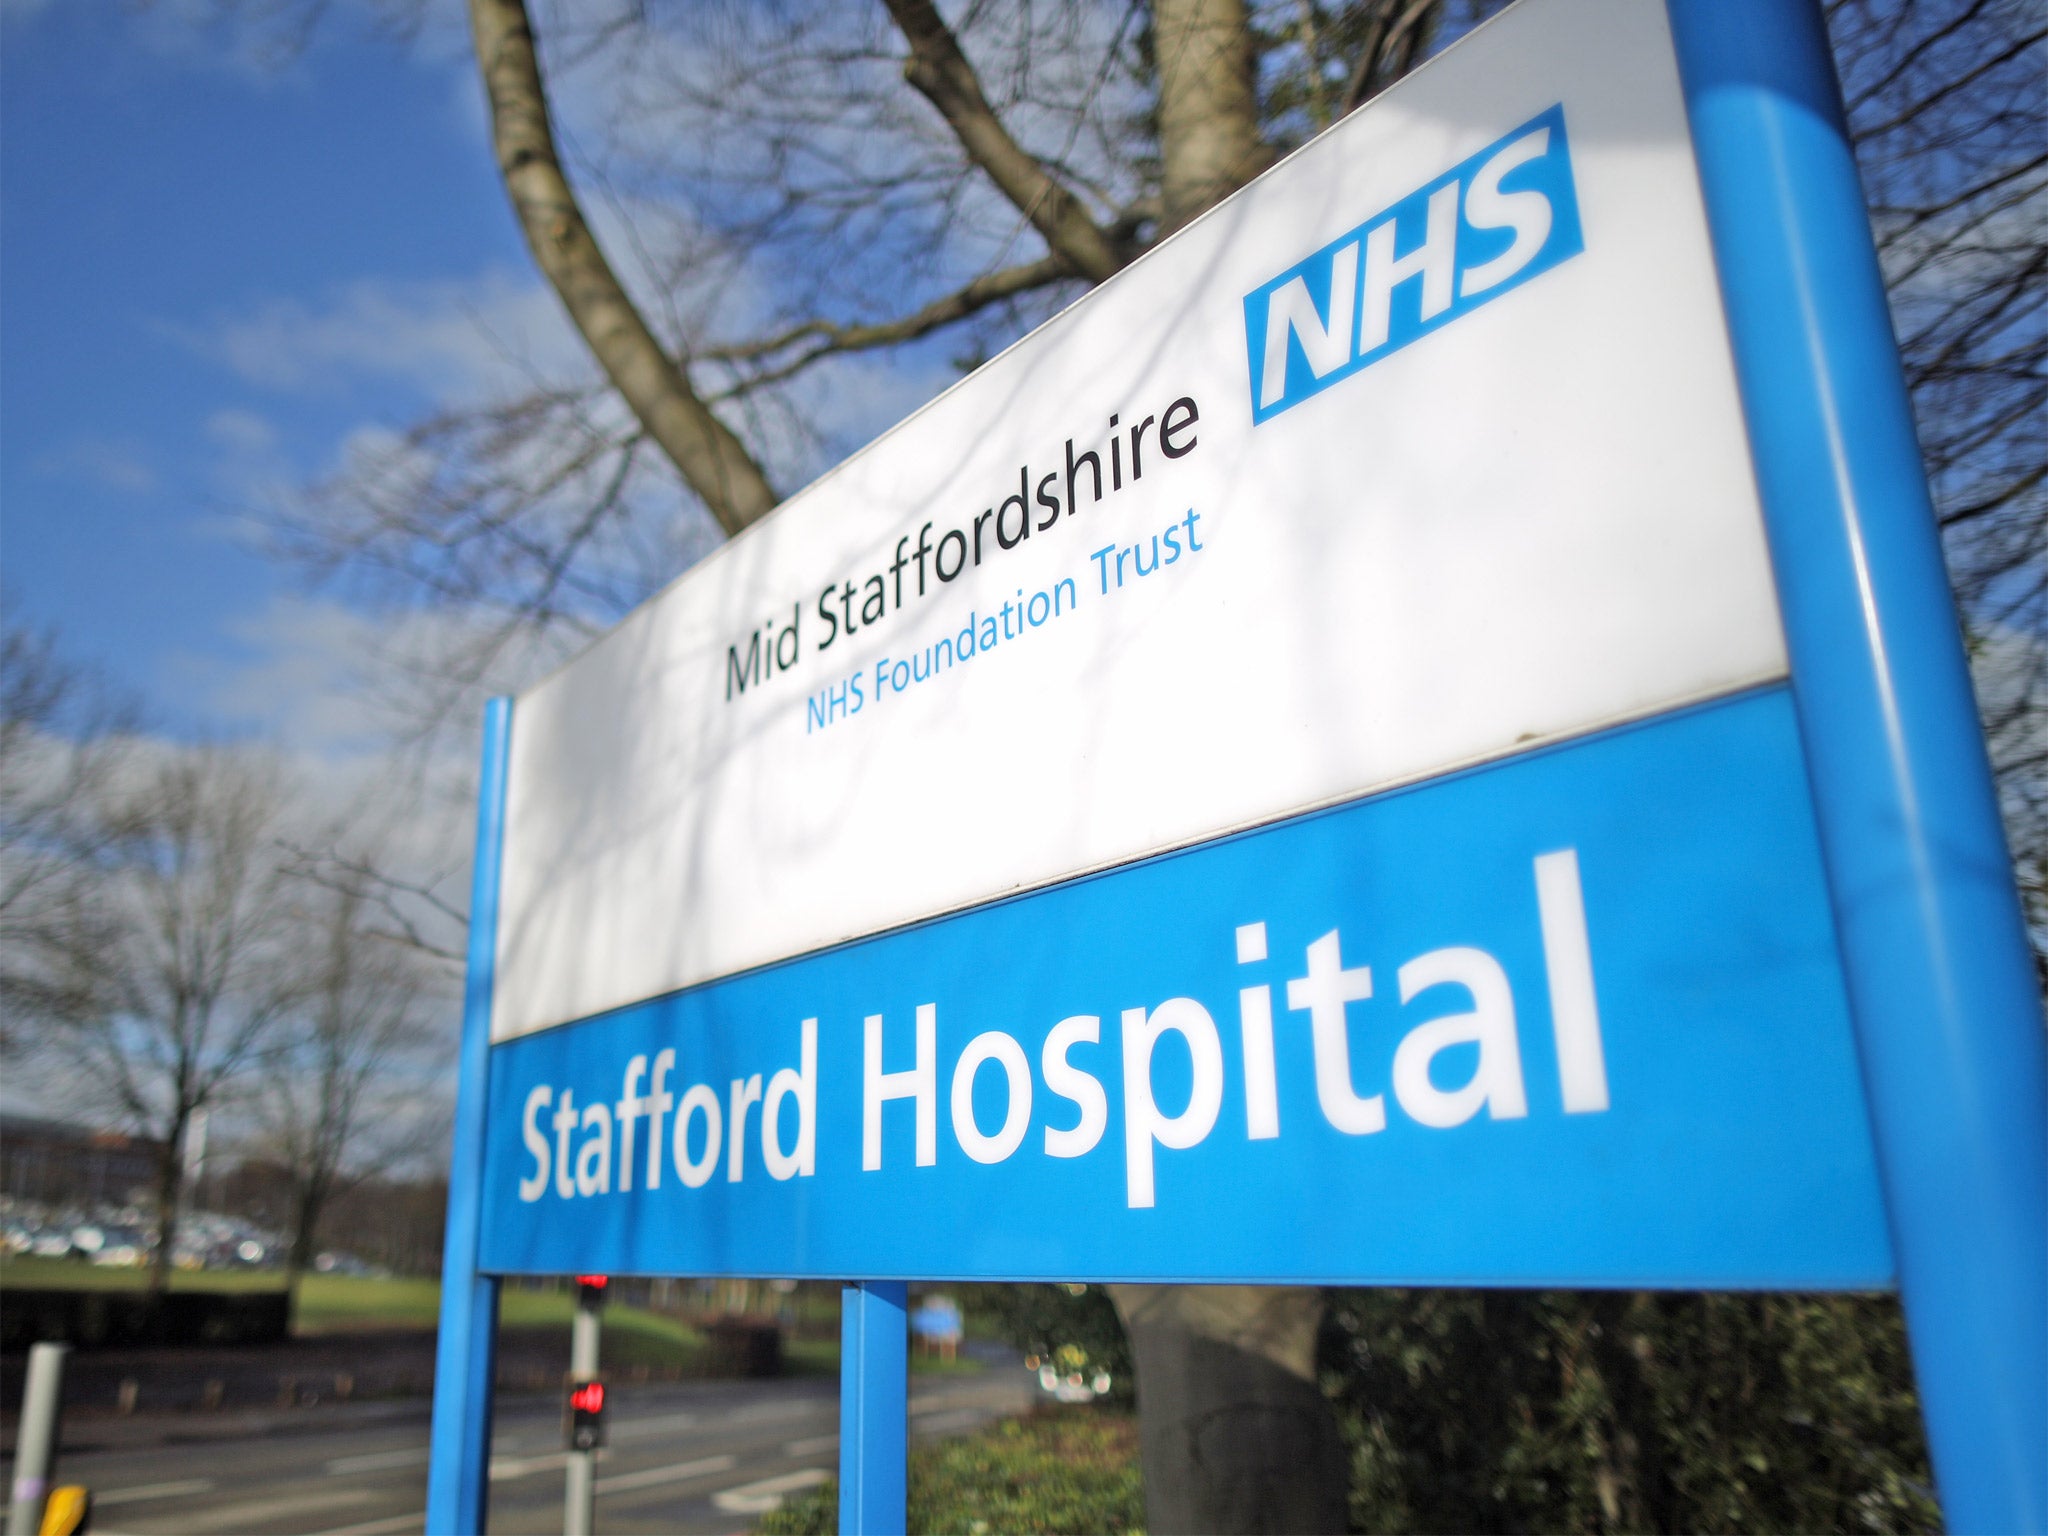 The inquiry into the catastrophic failings at Mid Staffordshire NHS Foundation Trust did not exonerate individuals of blame for the “appalling” suffering of patients caught up in the scandal, the man who led the investigation said today